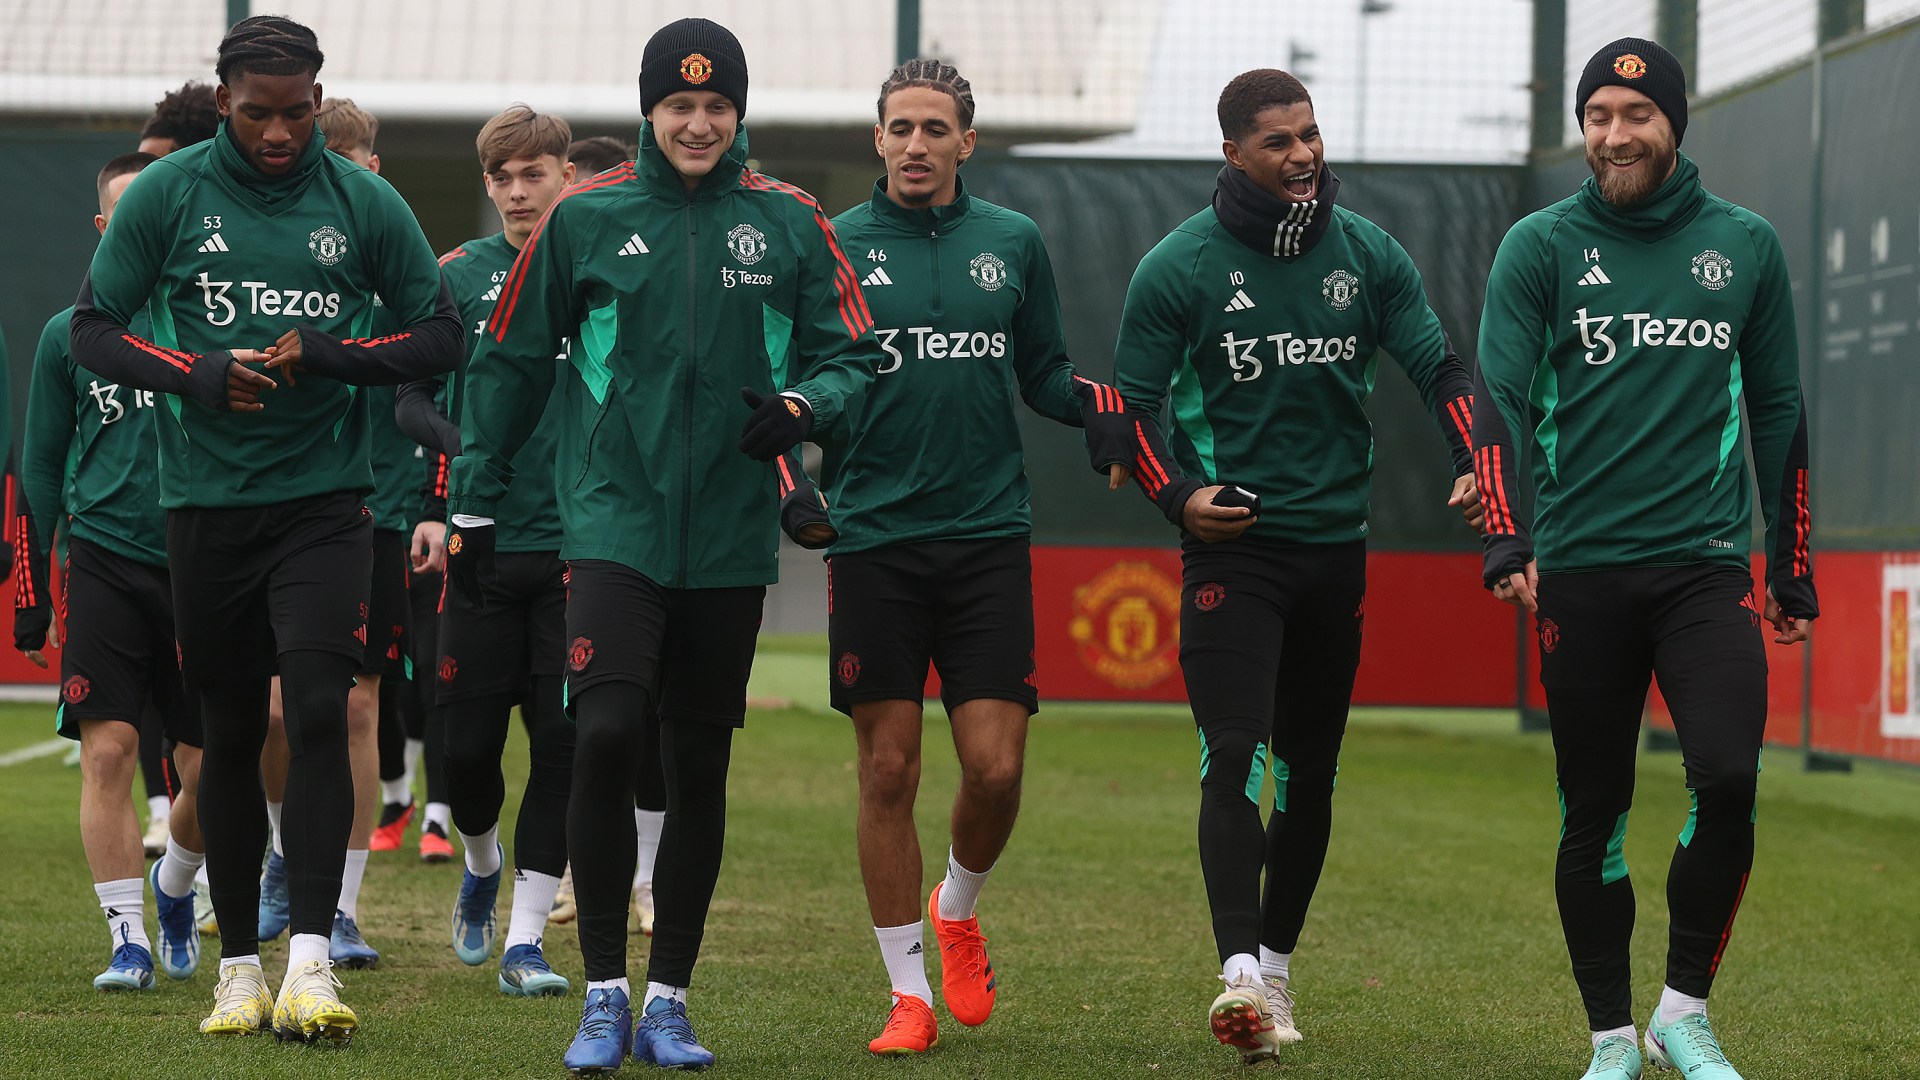 Man Utd in huge injury boost as star midfielder trains ahead of busy festive schedule after five weeks out